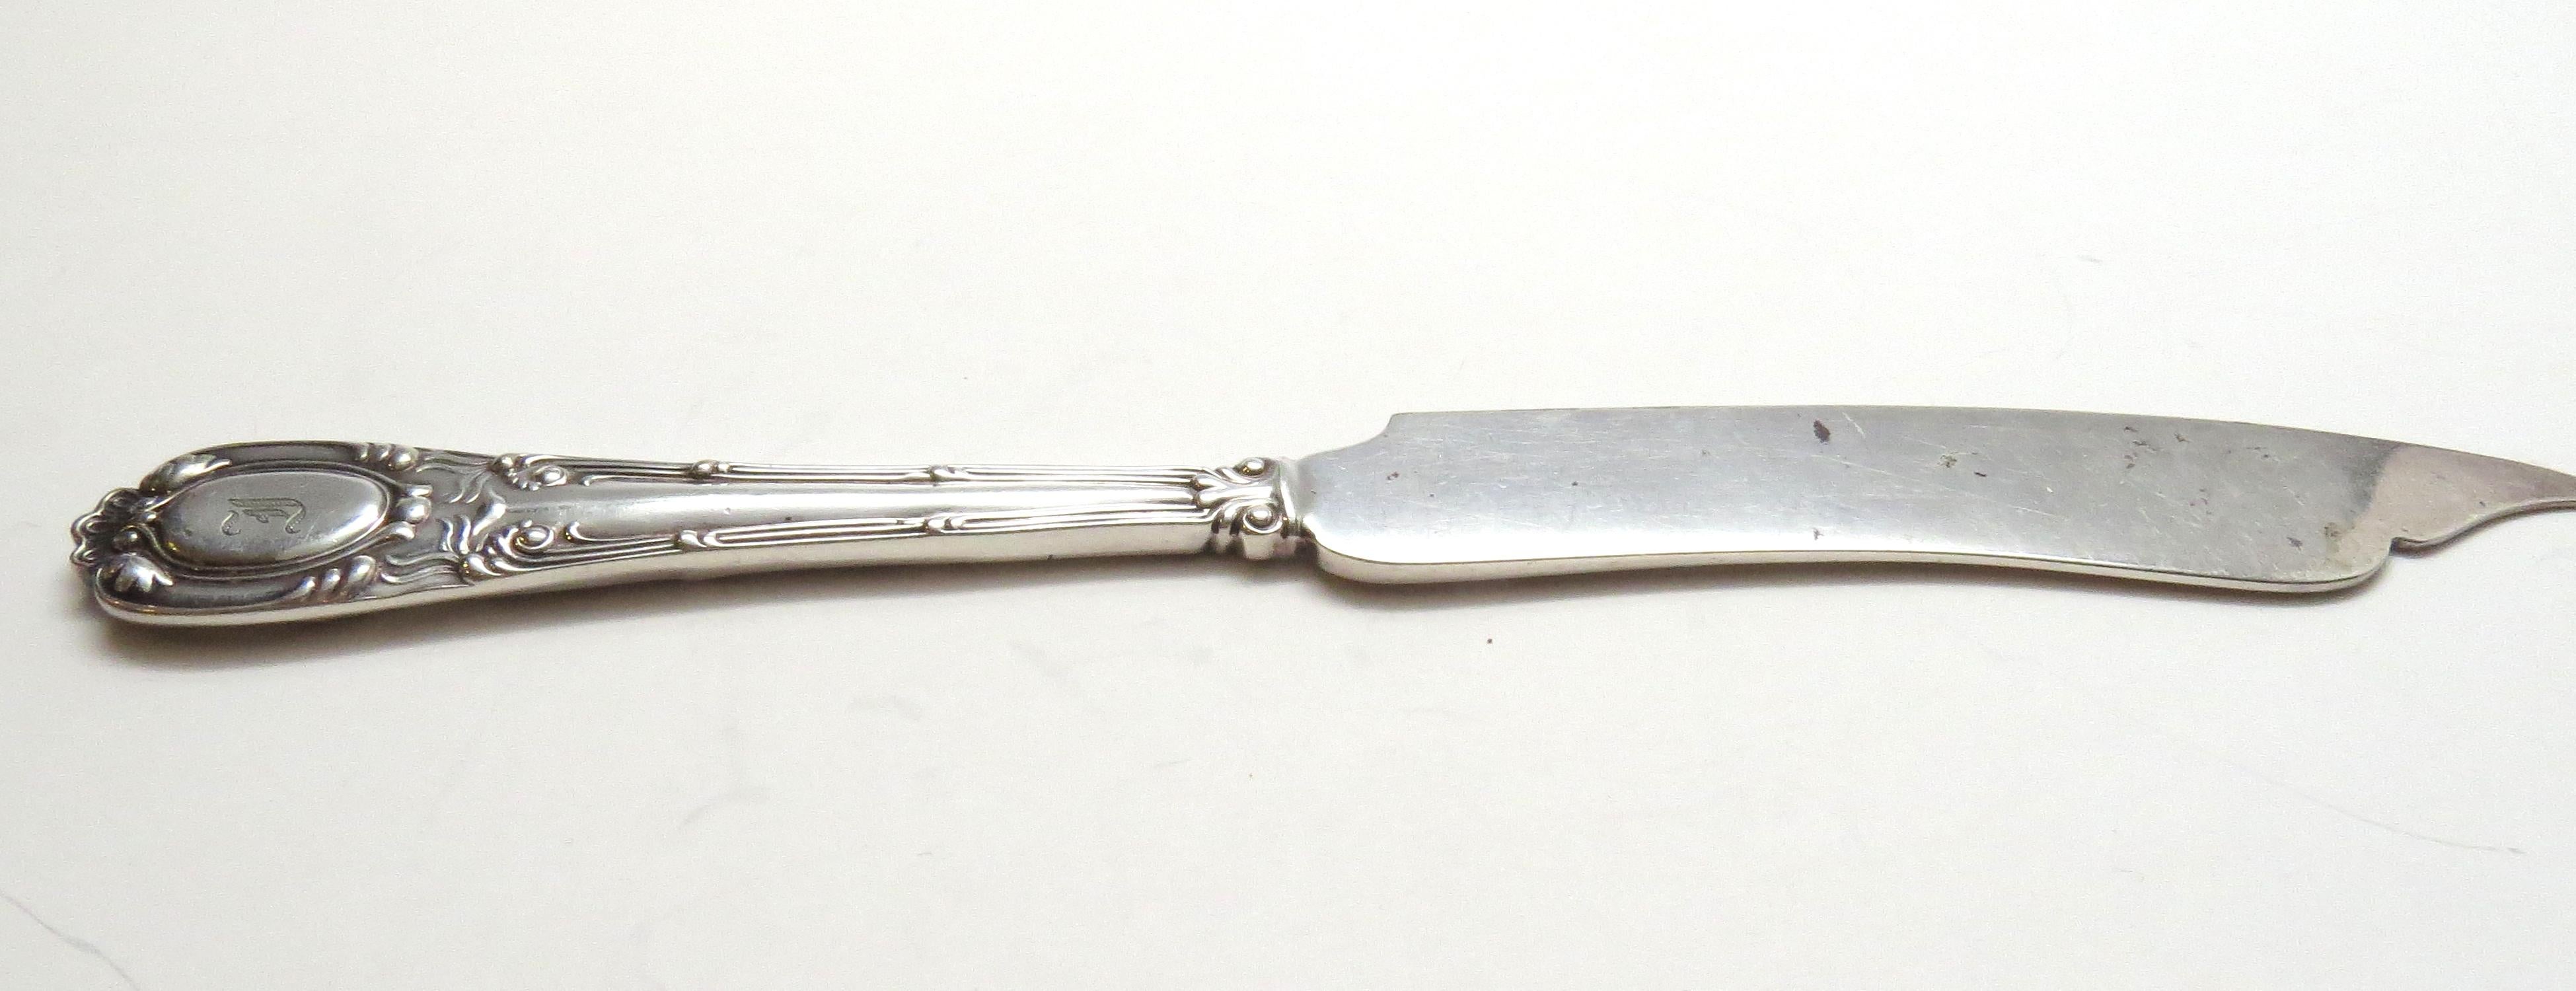 Tiffany & Co. silver plate old French fish knife. 
Measures: Approx 7 7/8 inches in length, approx. 3/4 inch wide at its widest part. 
Weight: 50.4 g / 32.4 dwt. 
Condition: In good condition with surface scratches and minor tarnishing. 
Hallmark: